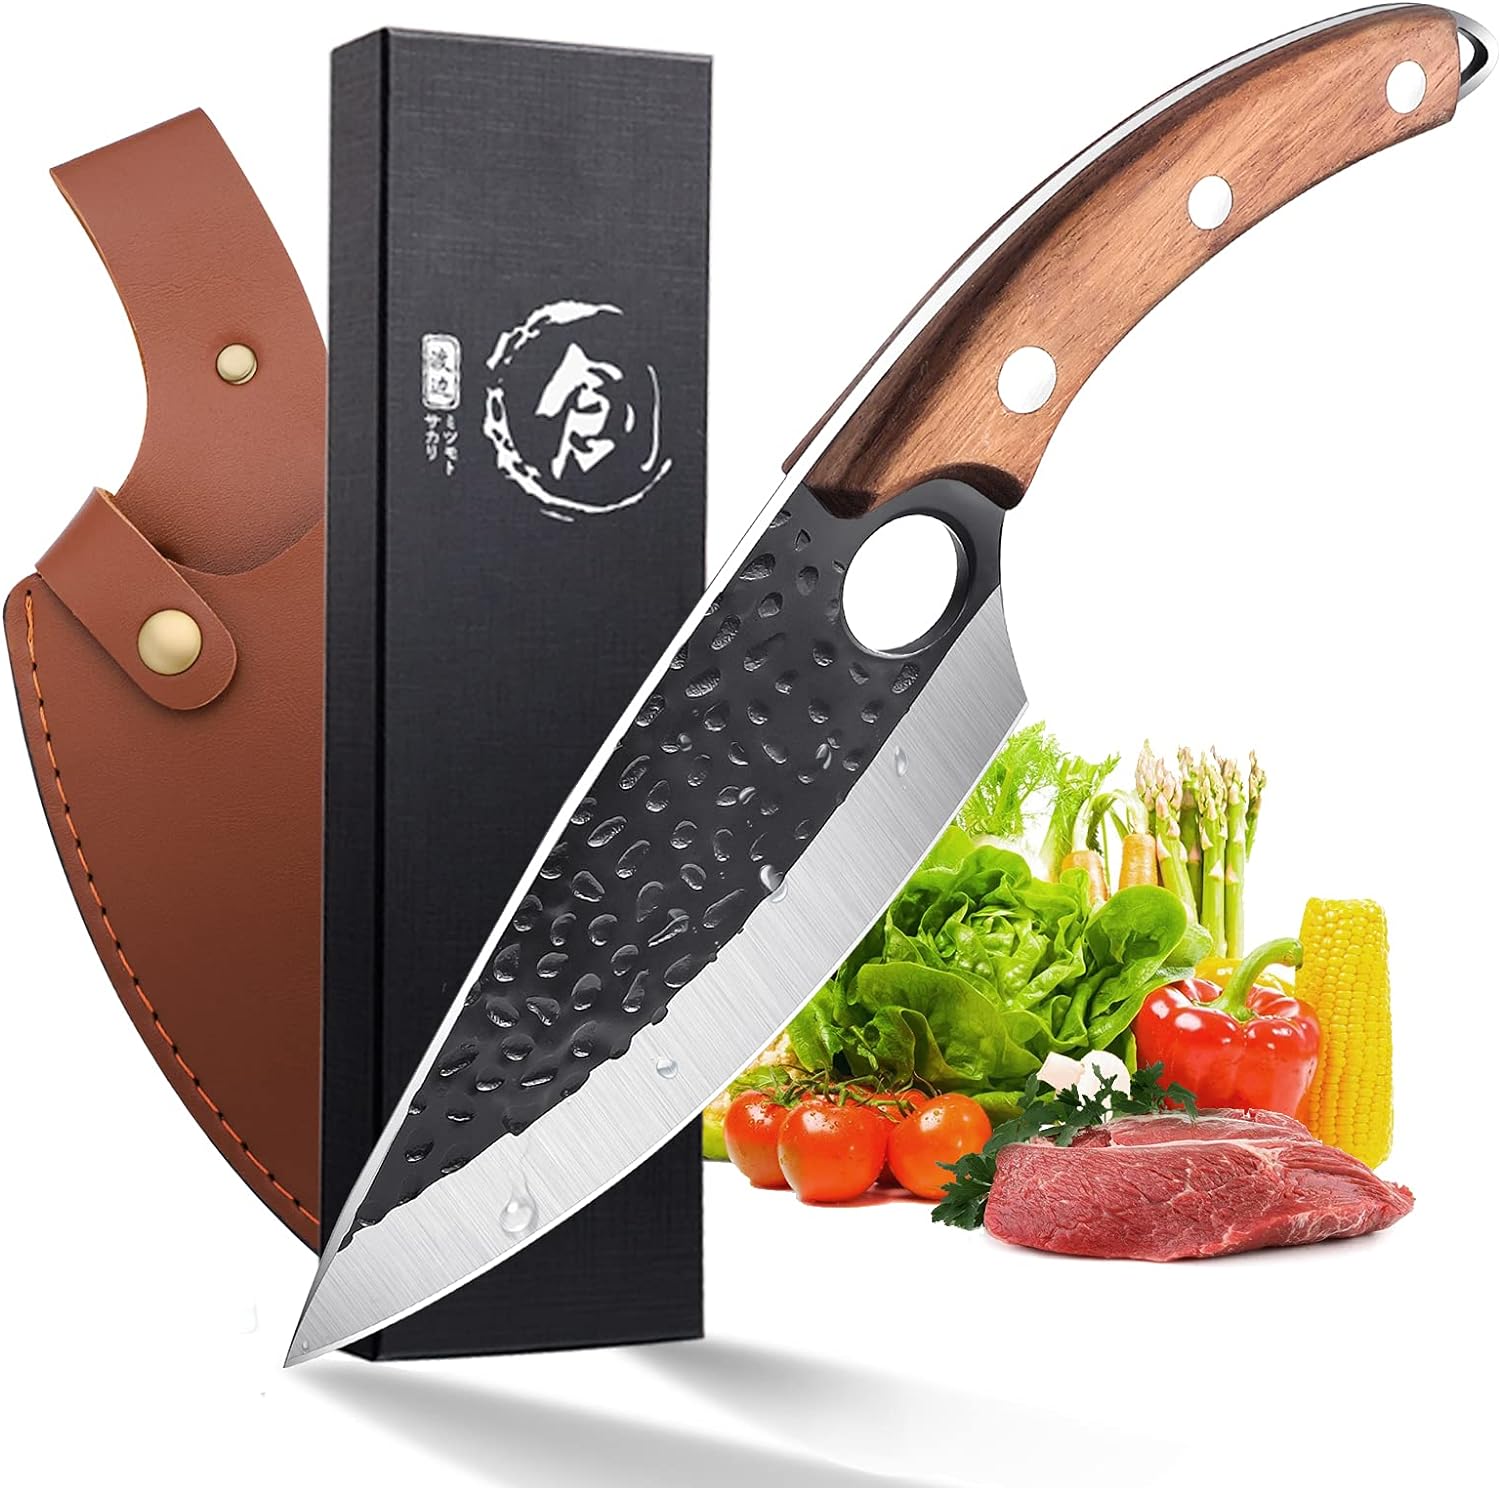 KD Butcher Knife Hand Forged Kitchen Meat Cleaver with Gift Box